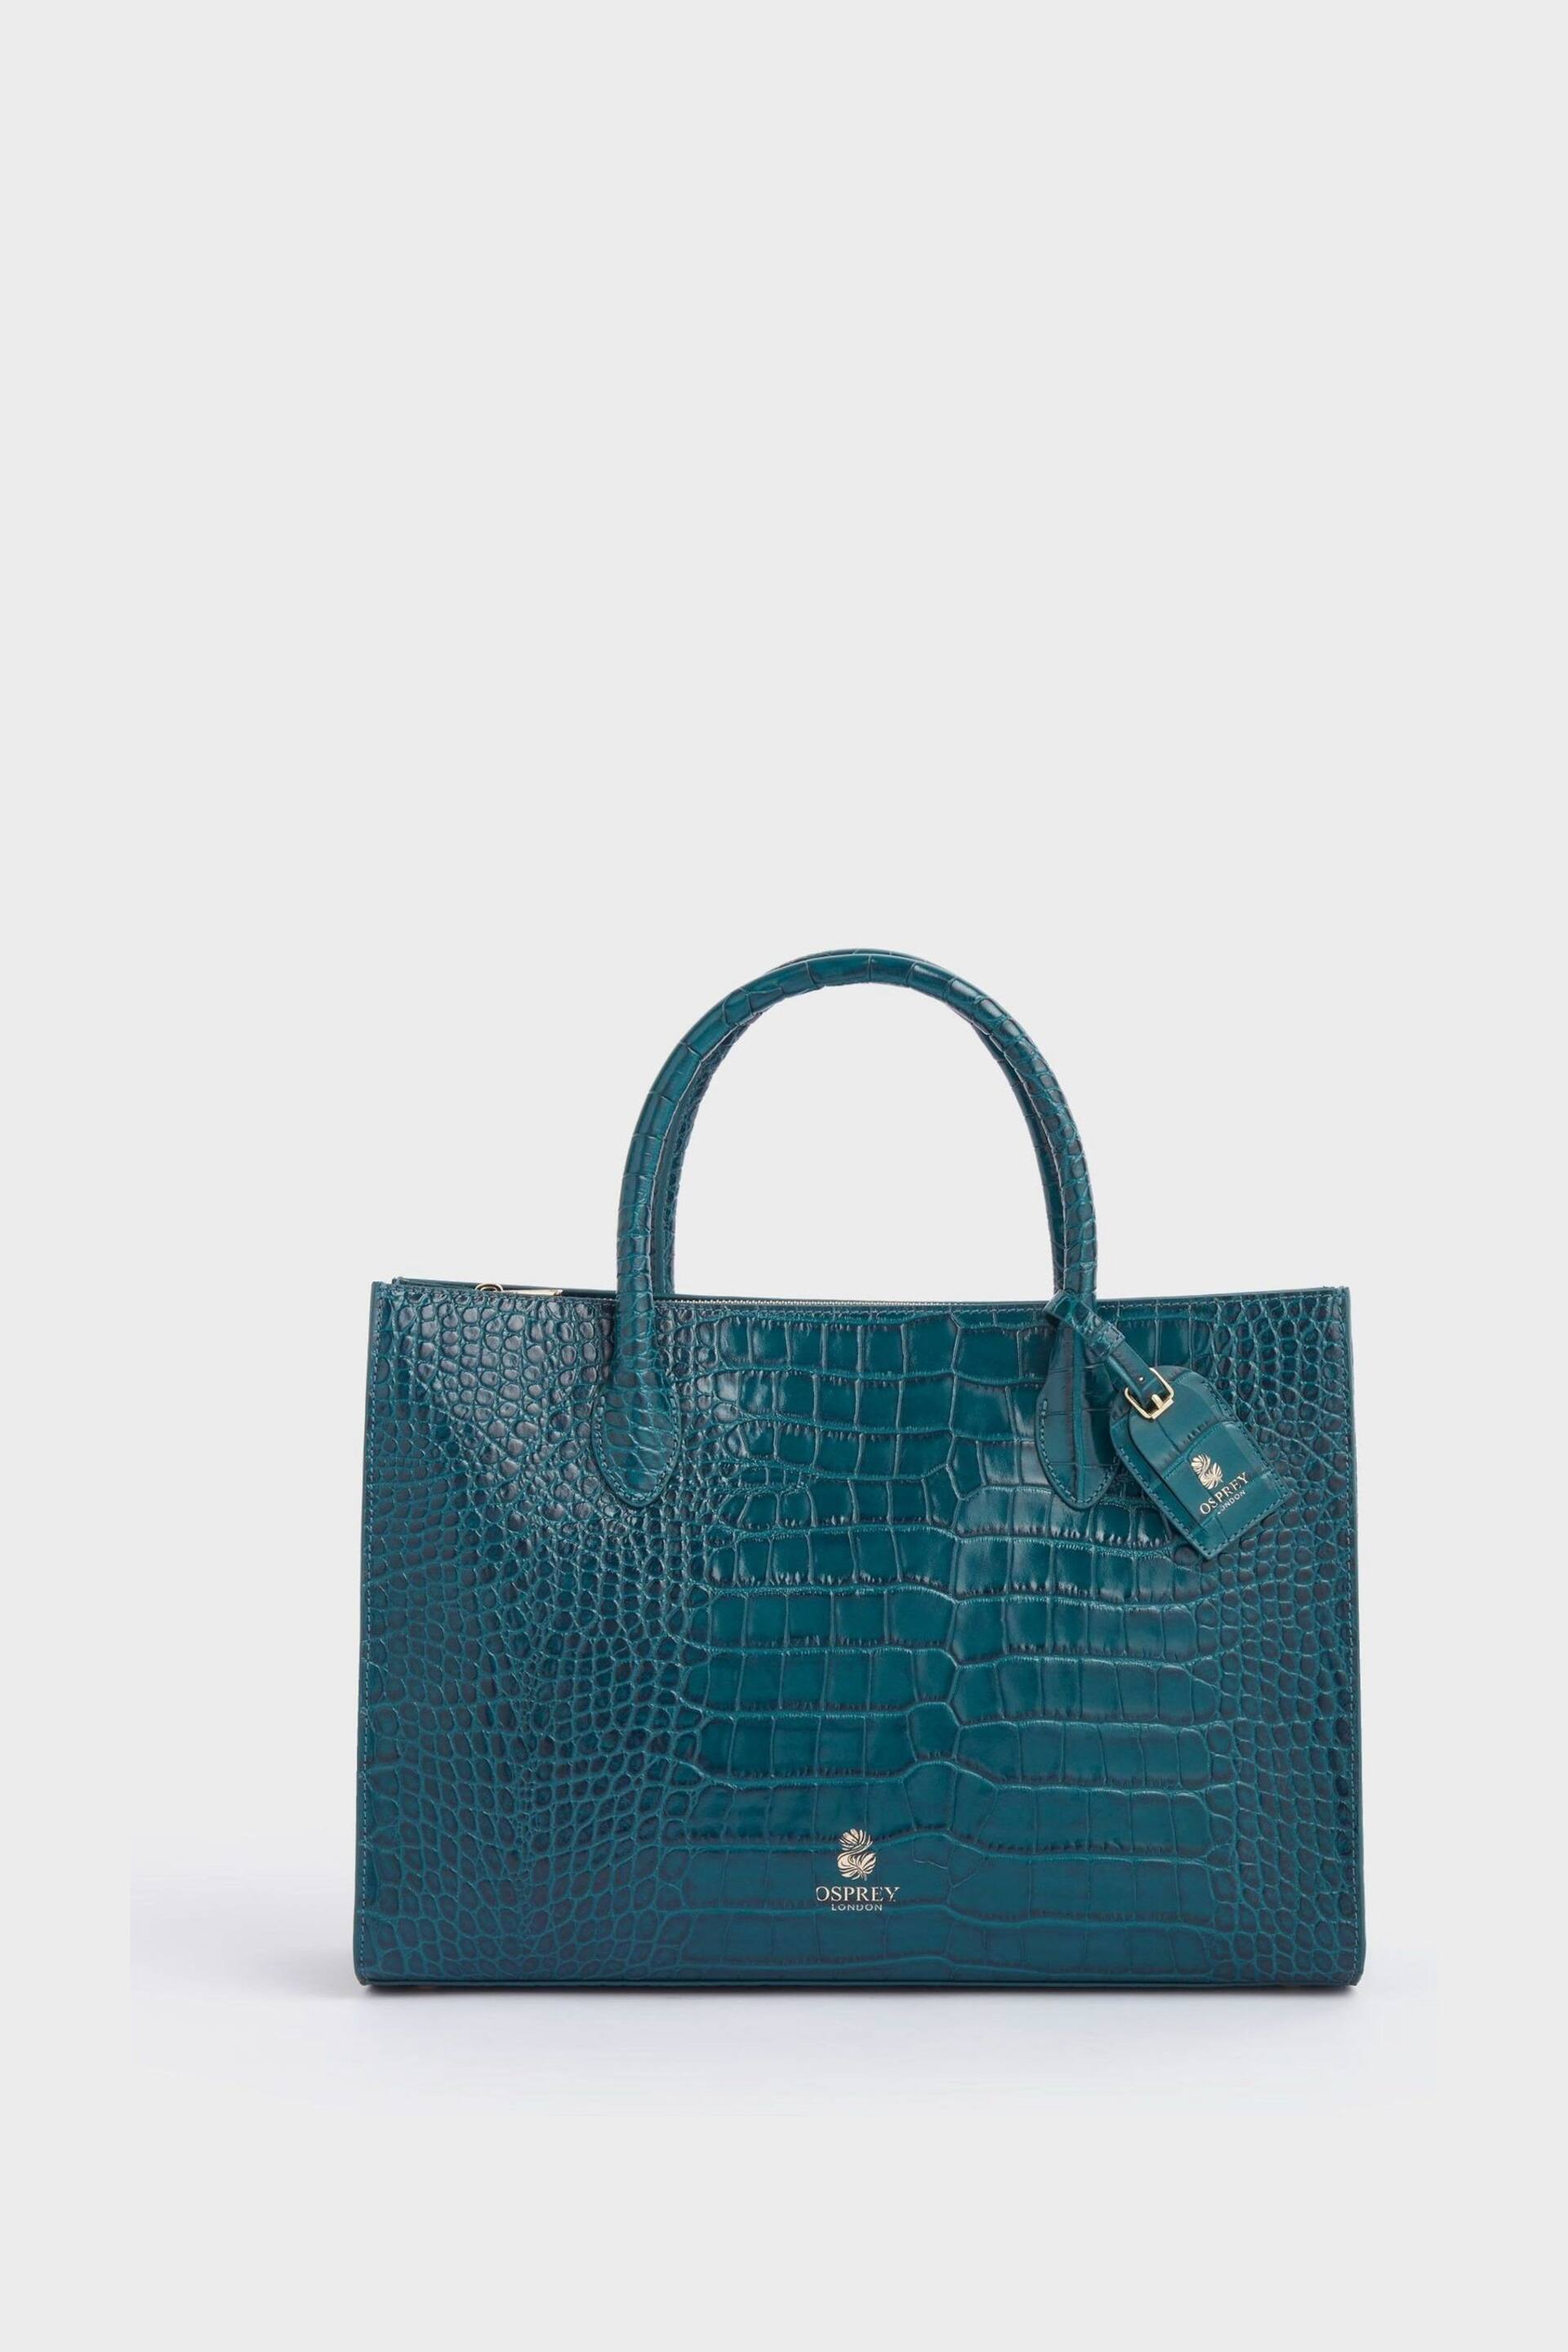 OSPREY LONDON Wentworth Italian Leather Tote - Image 1 of 6